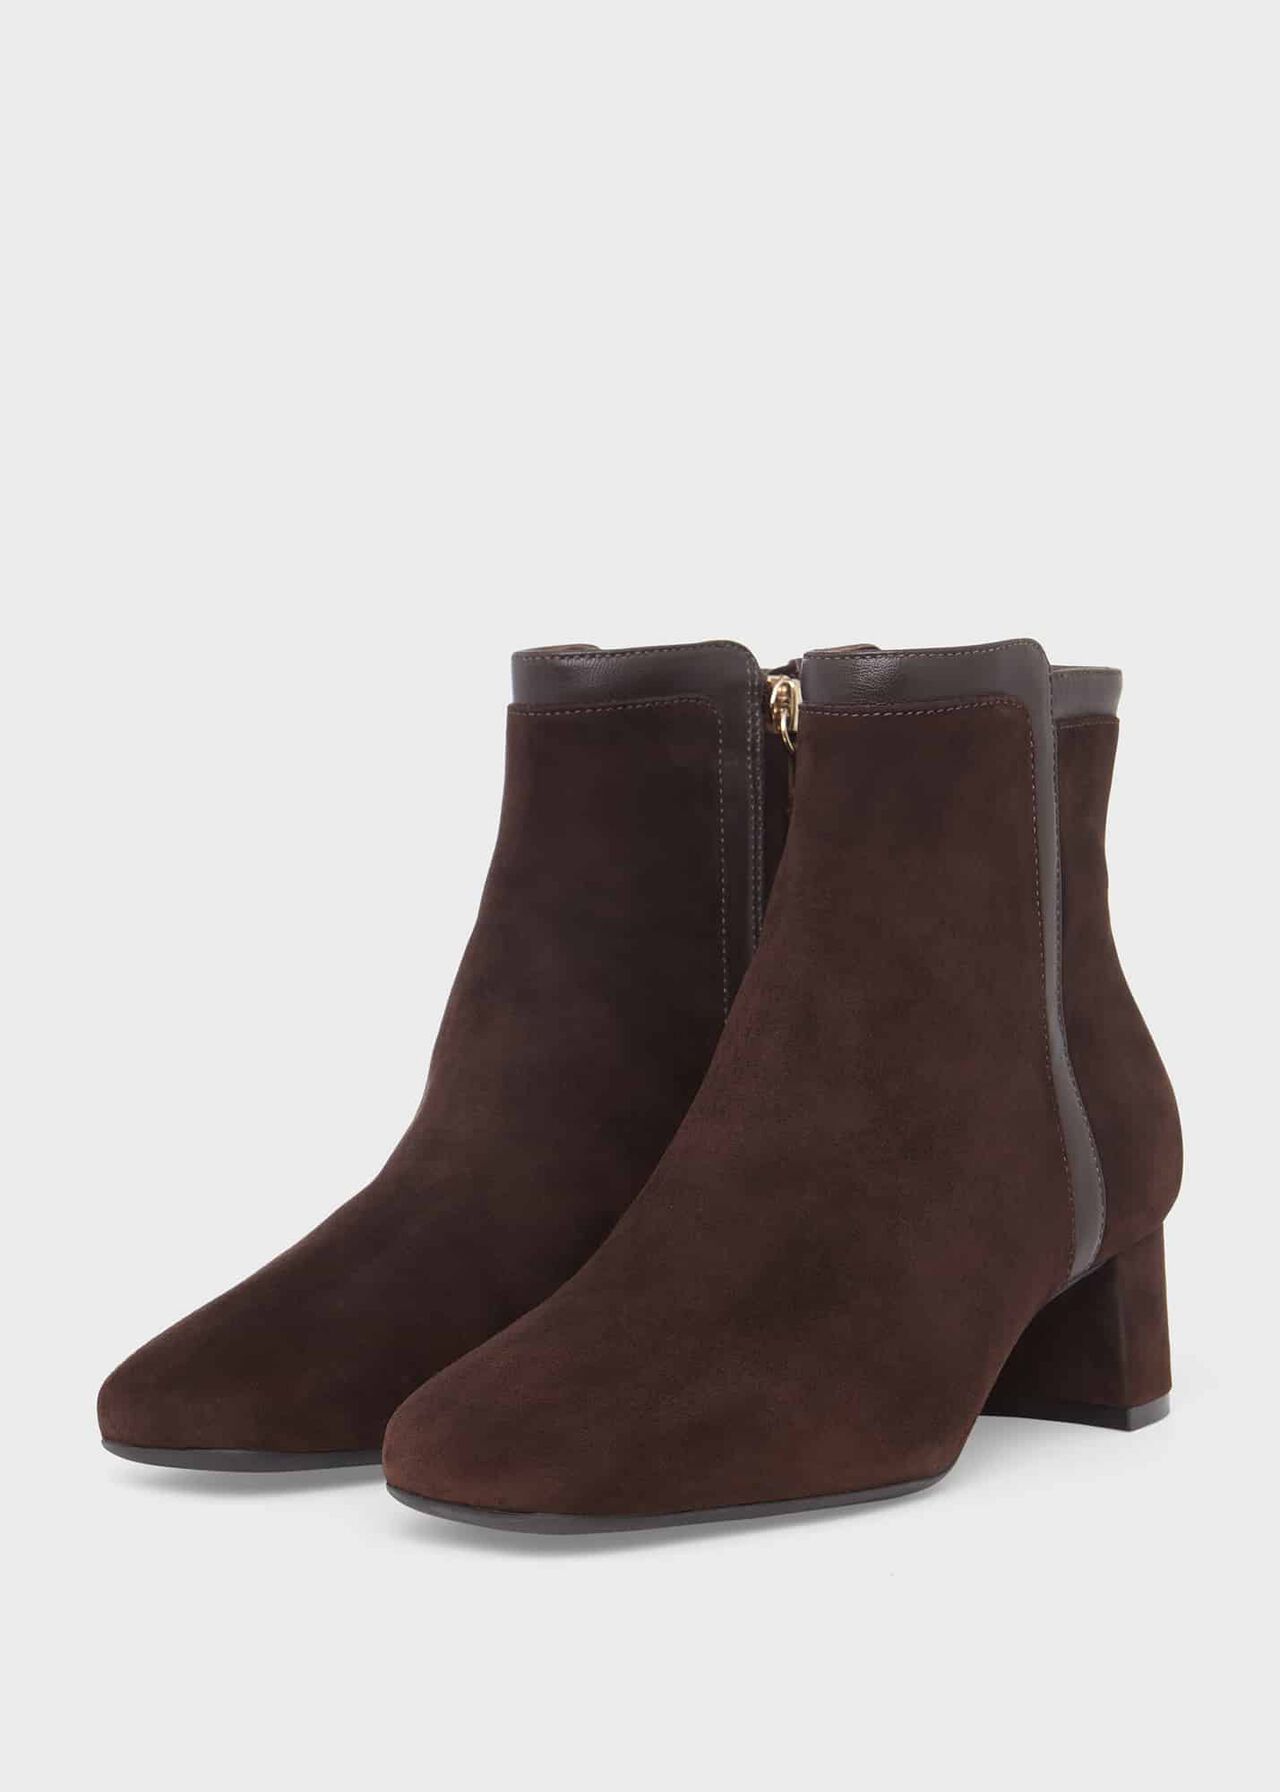 Iro Ankle Boots, Dark Brown, hi-res